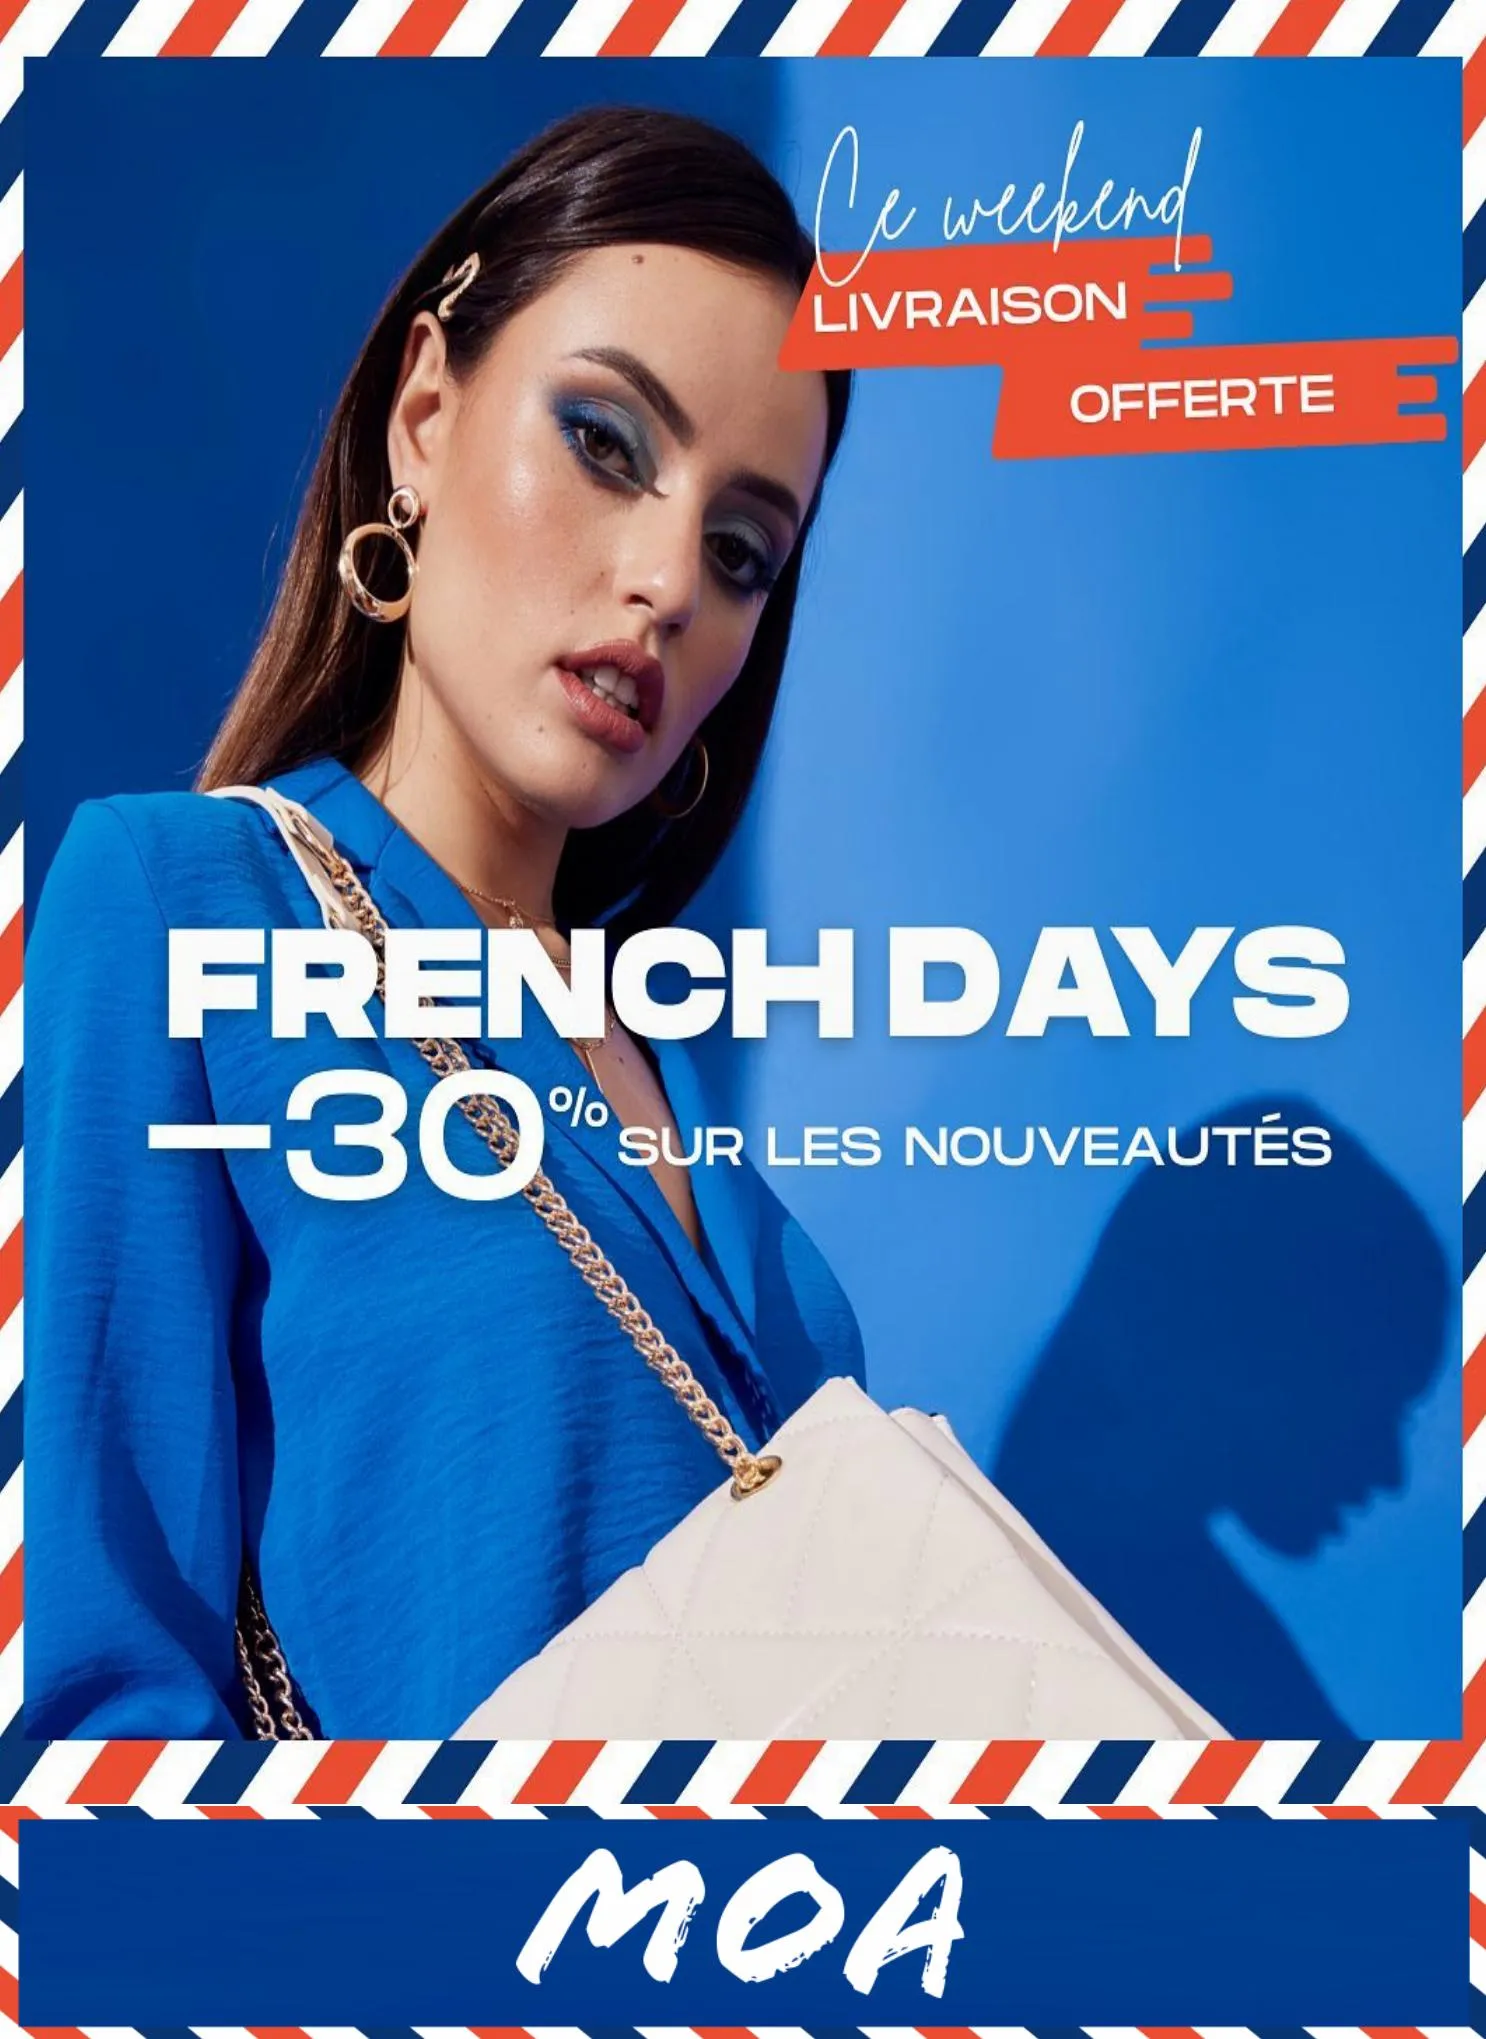 Catalogue French Days -30%*, page 00001